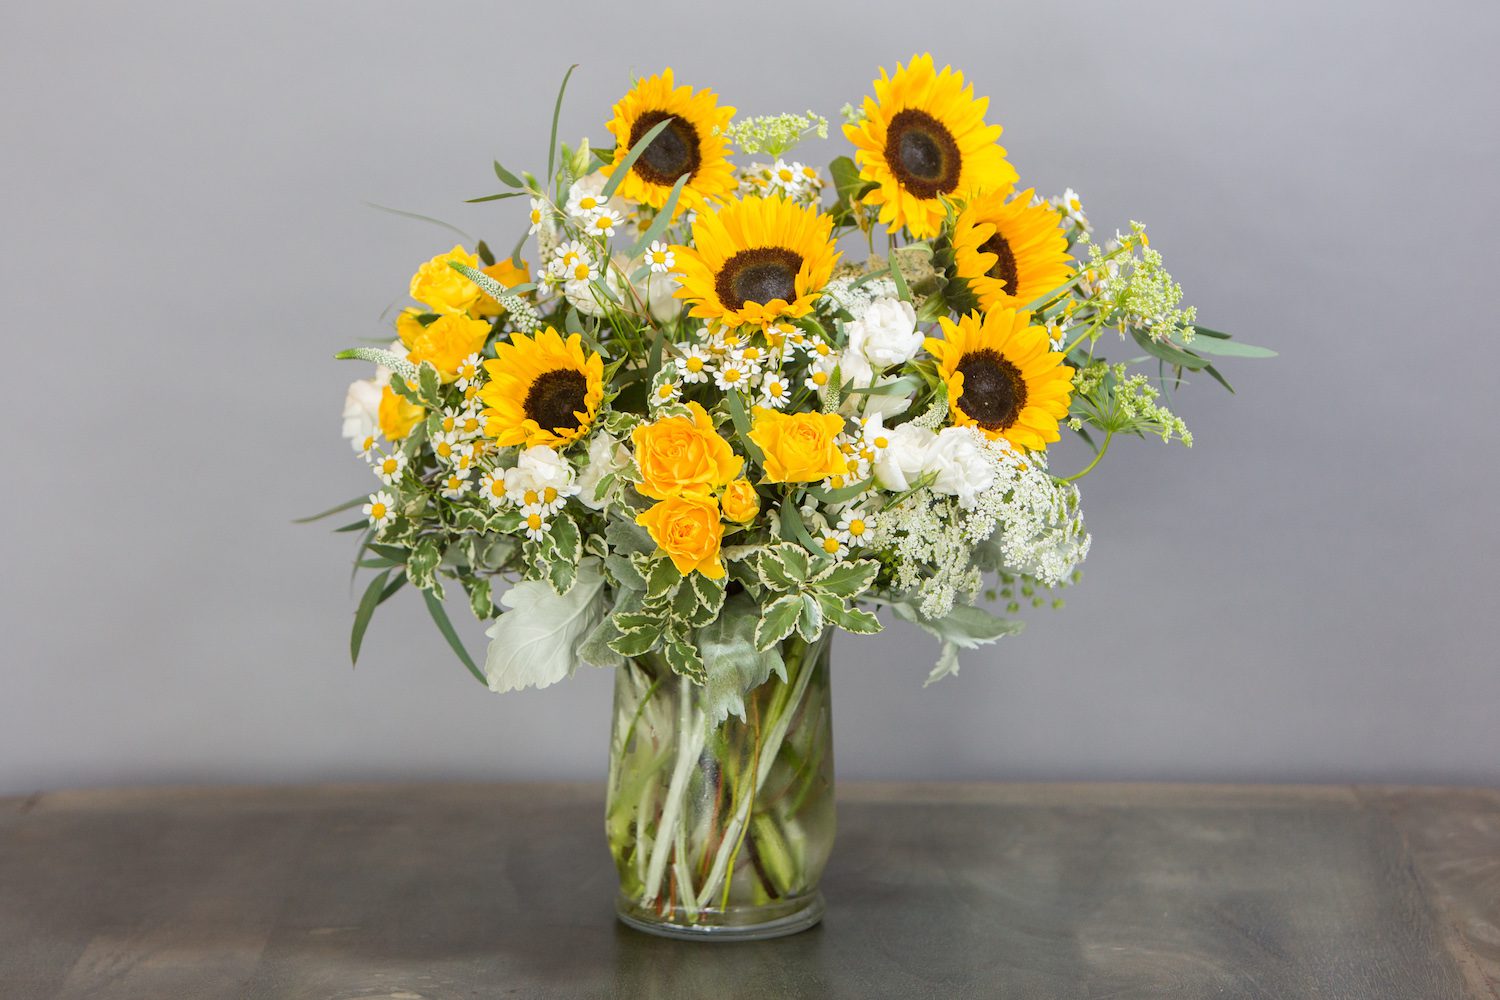 Sunflowers, Queen Anne's Lace and Spray Roses